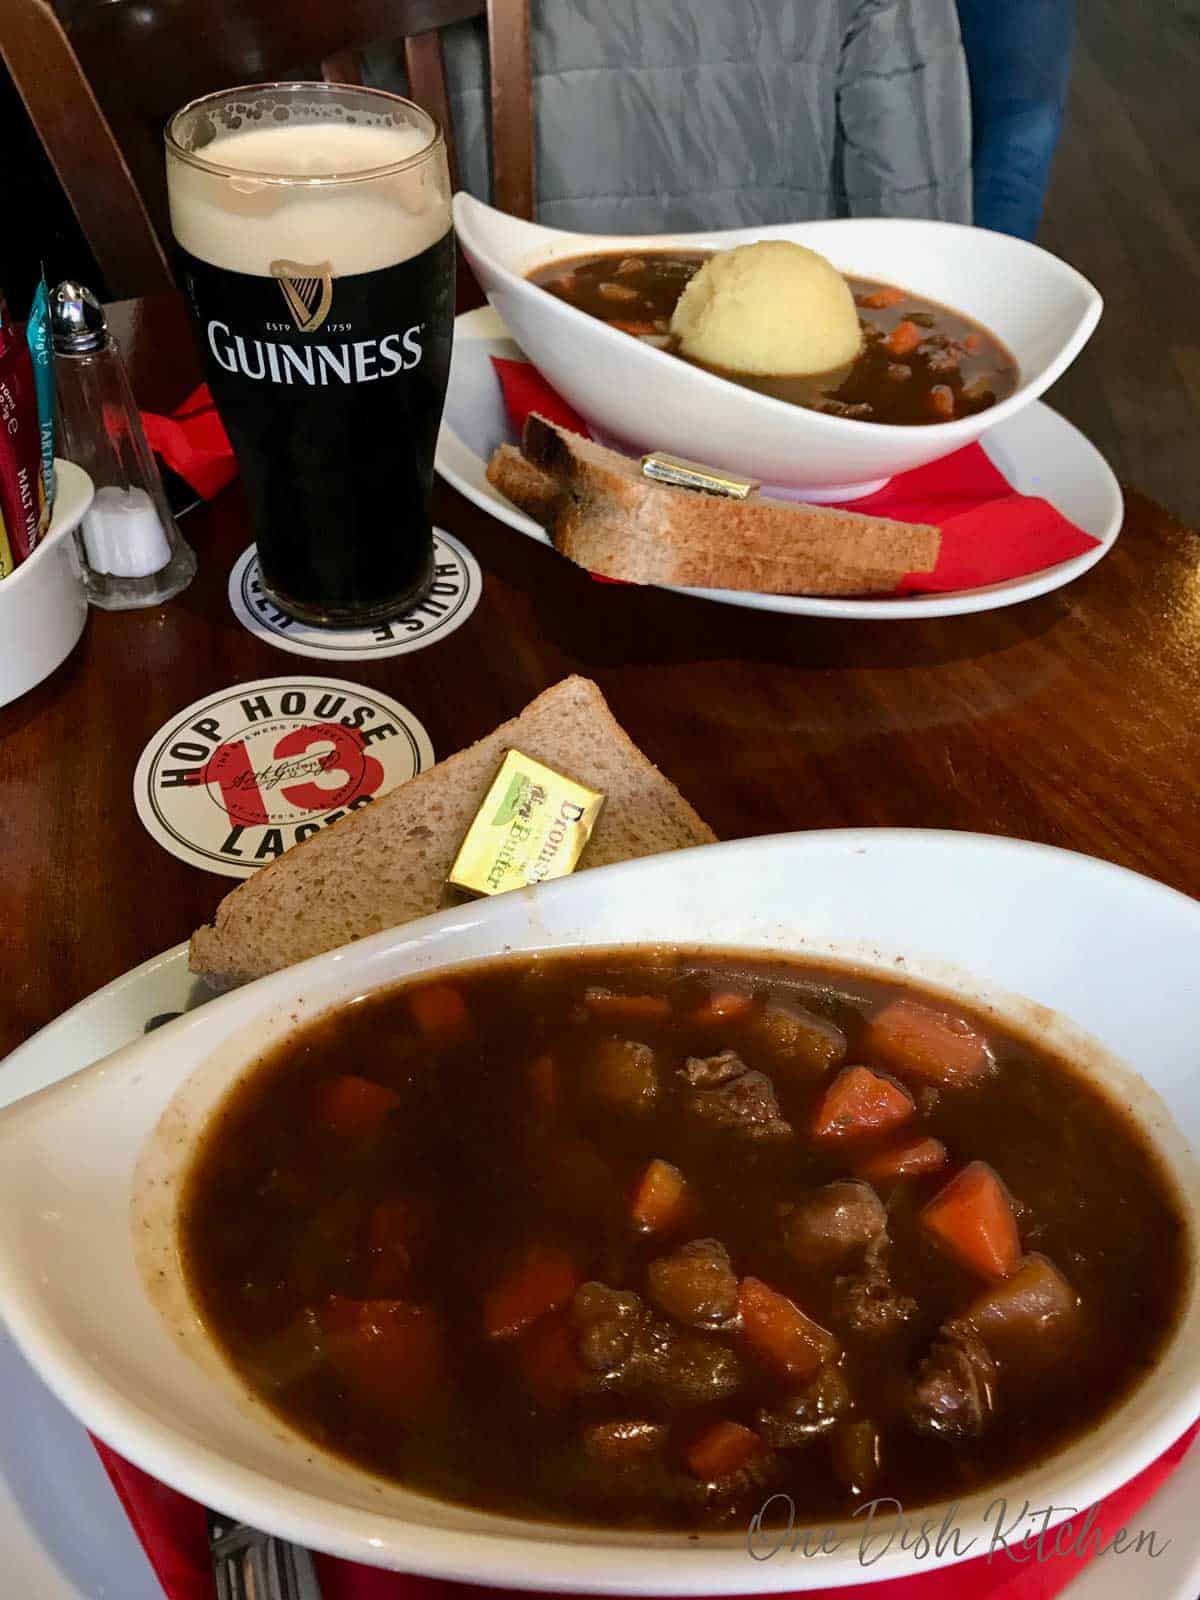 Enjoying two bowls of irish stew in a pub in dublin with a glass of Guinness.